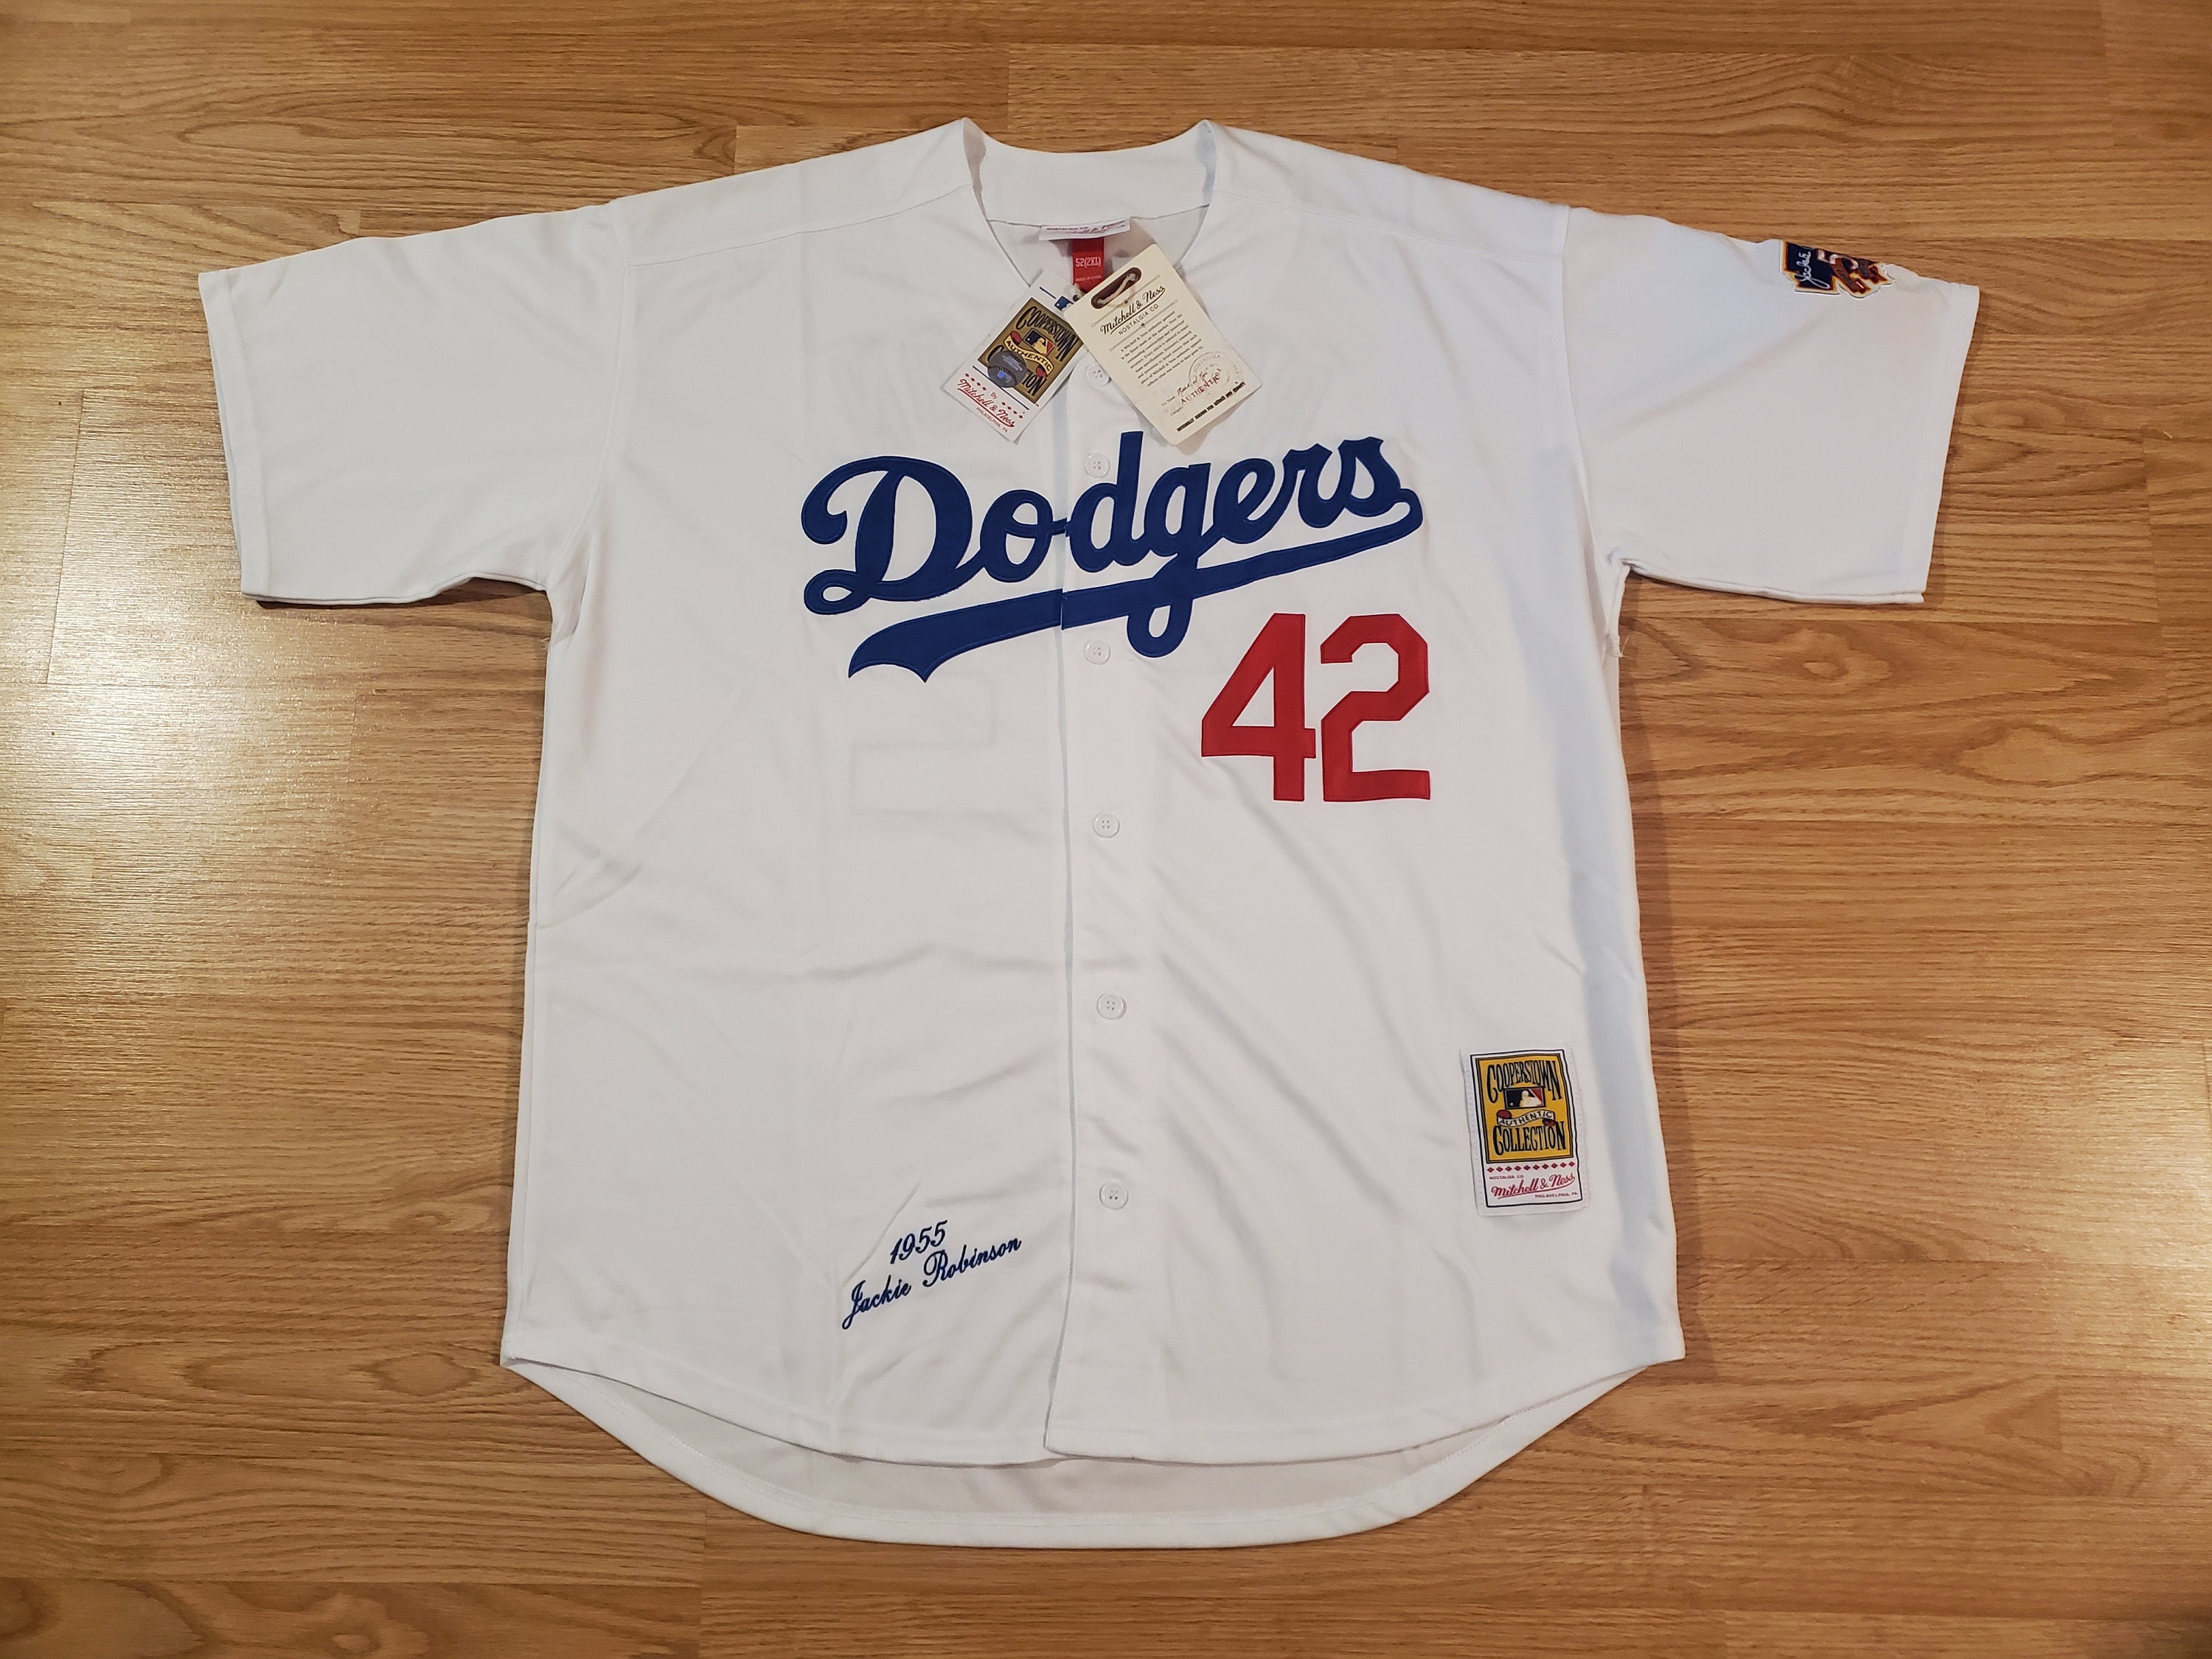 Mitchell & Ness Men's Brooklyn Dodgers Jackie Robinson Authentic Wool Jersey